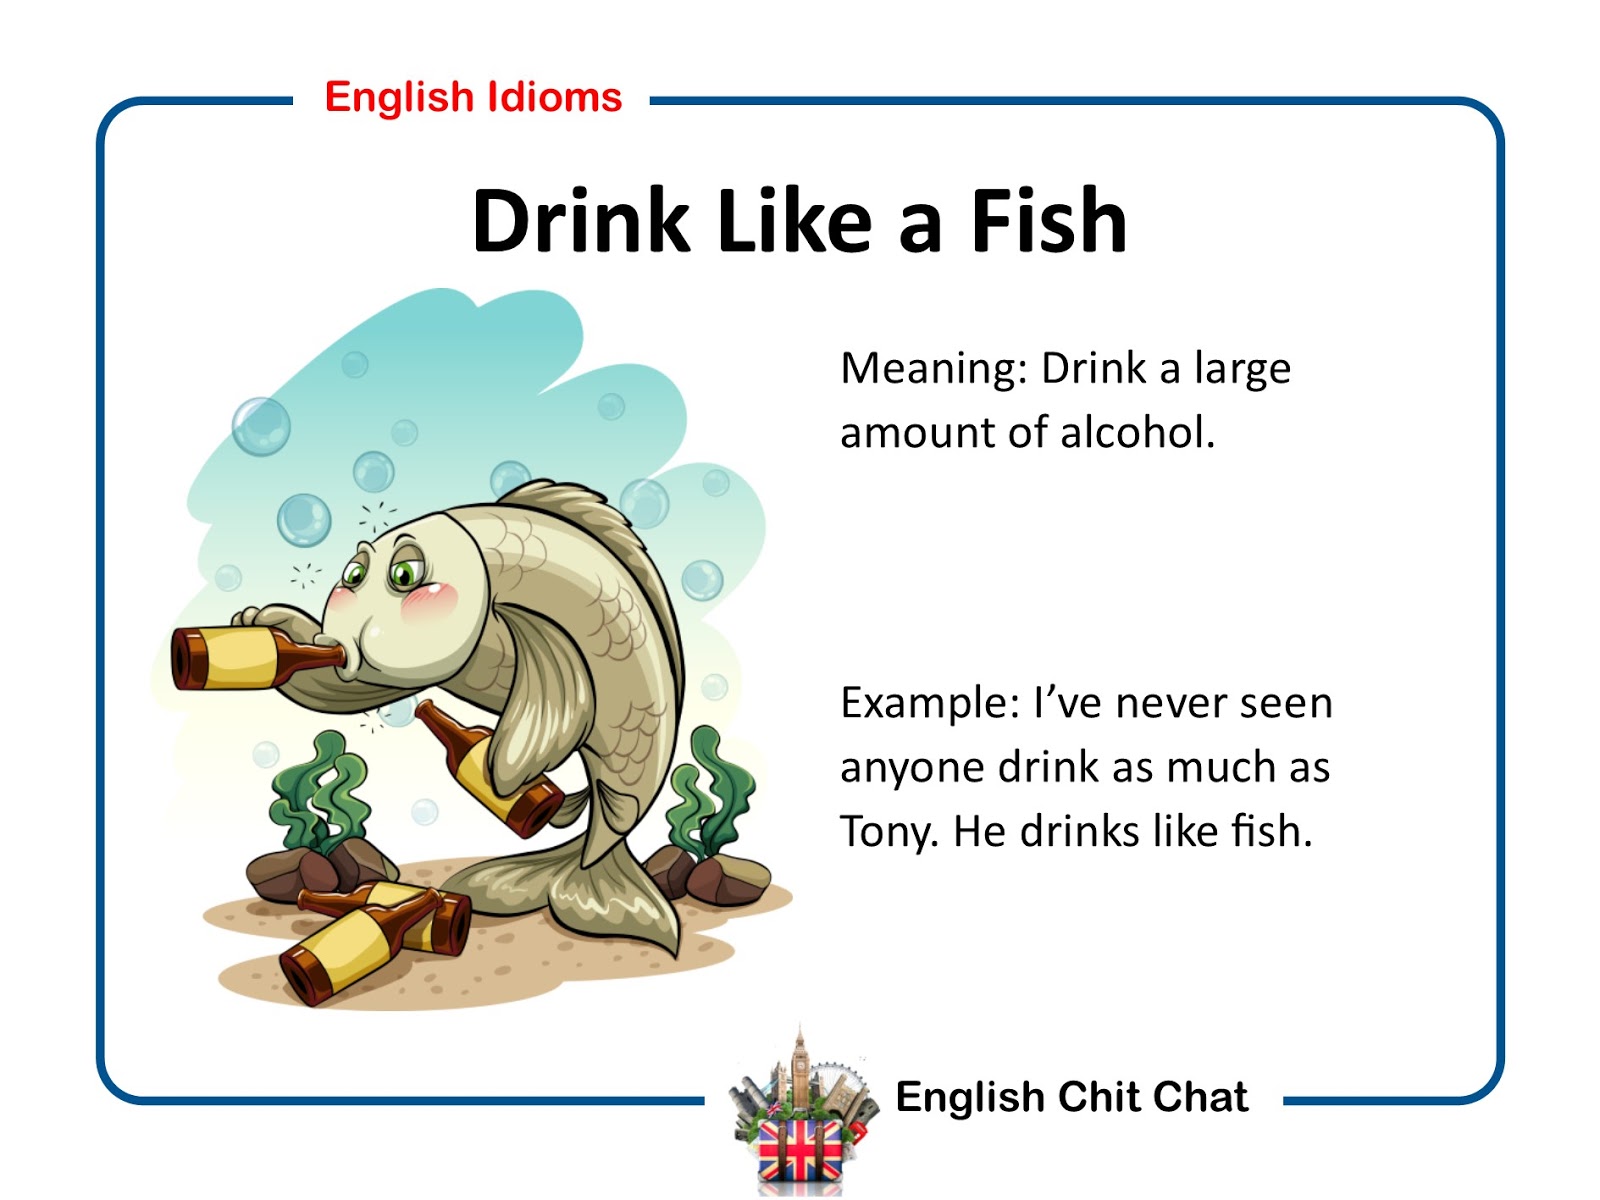 English Chit Chat: Common English Idioms Video And Pictures 